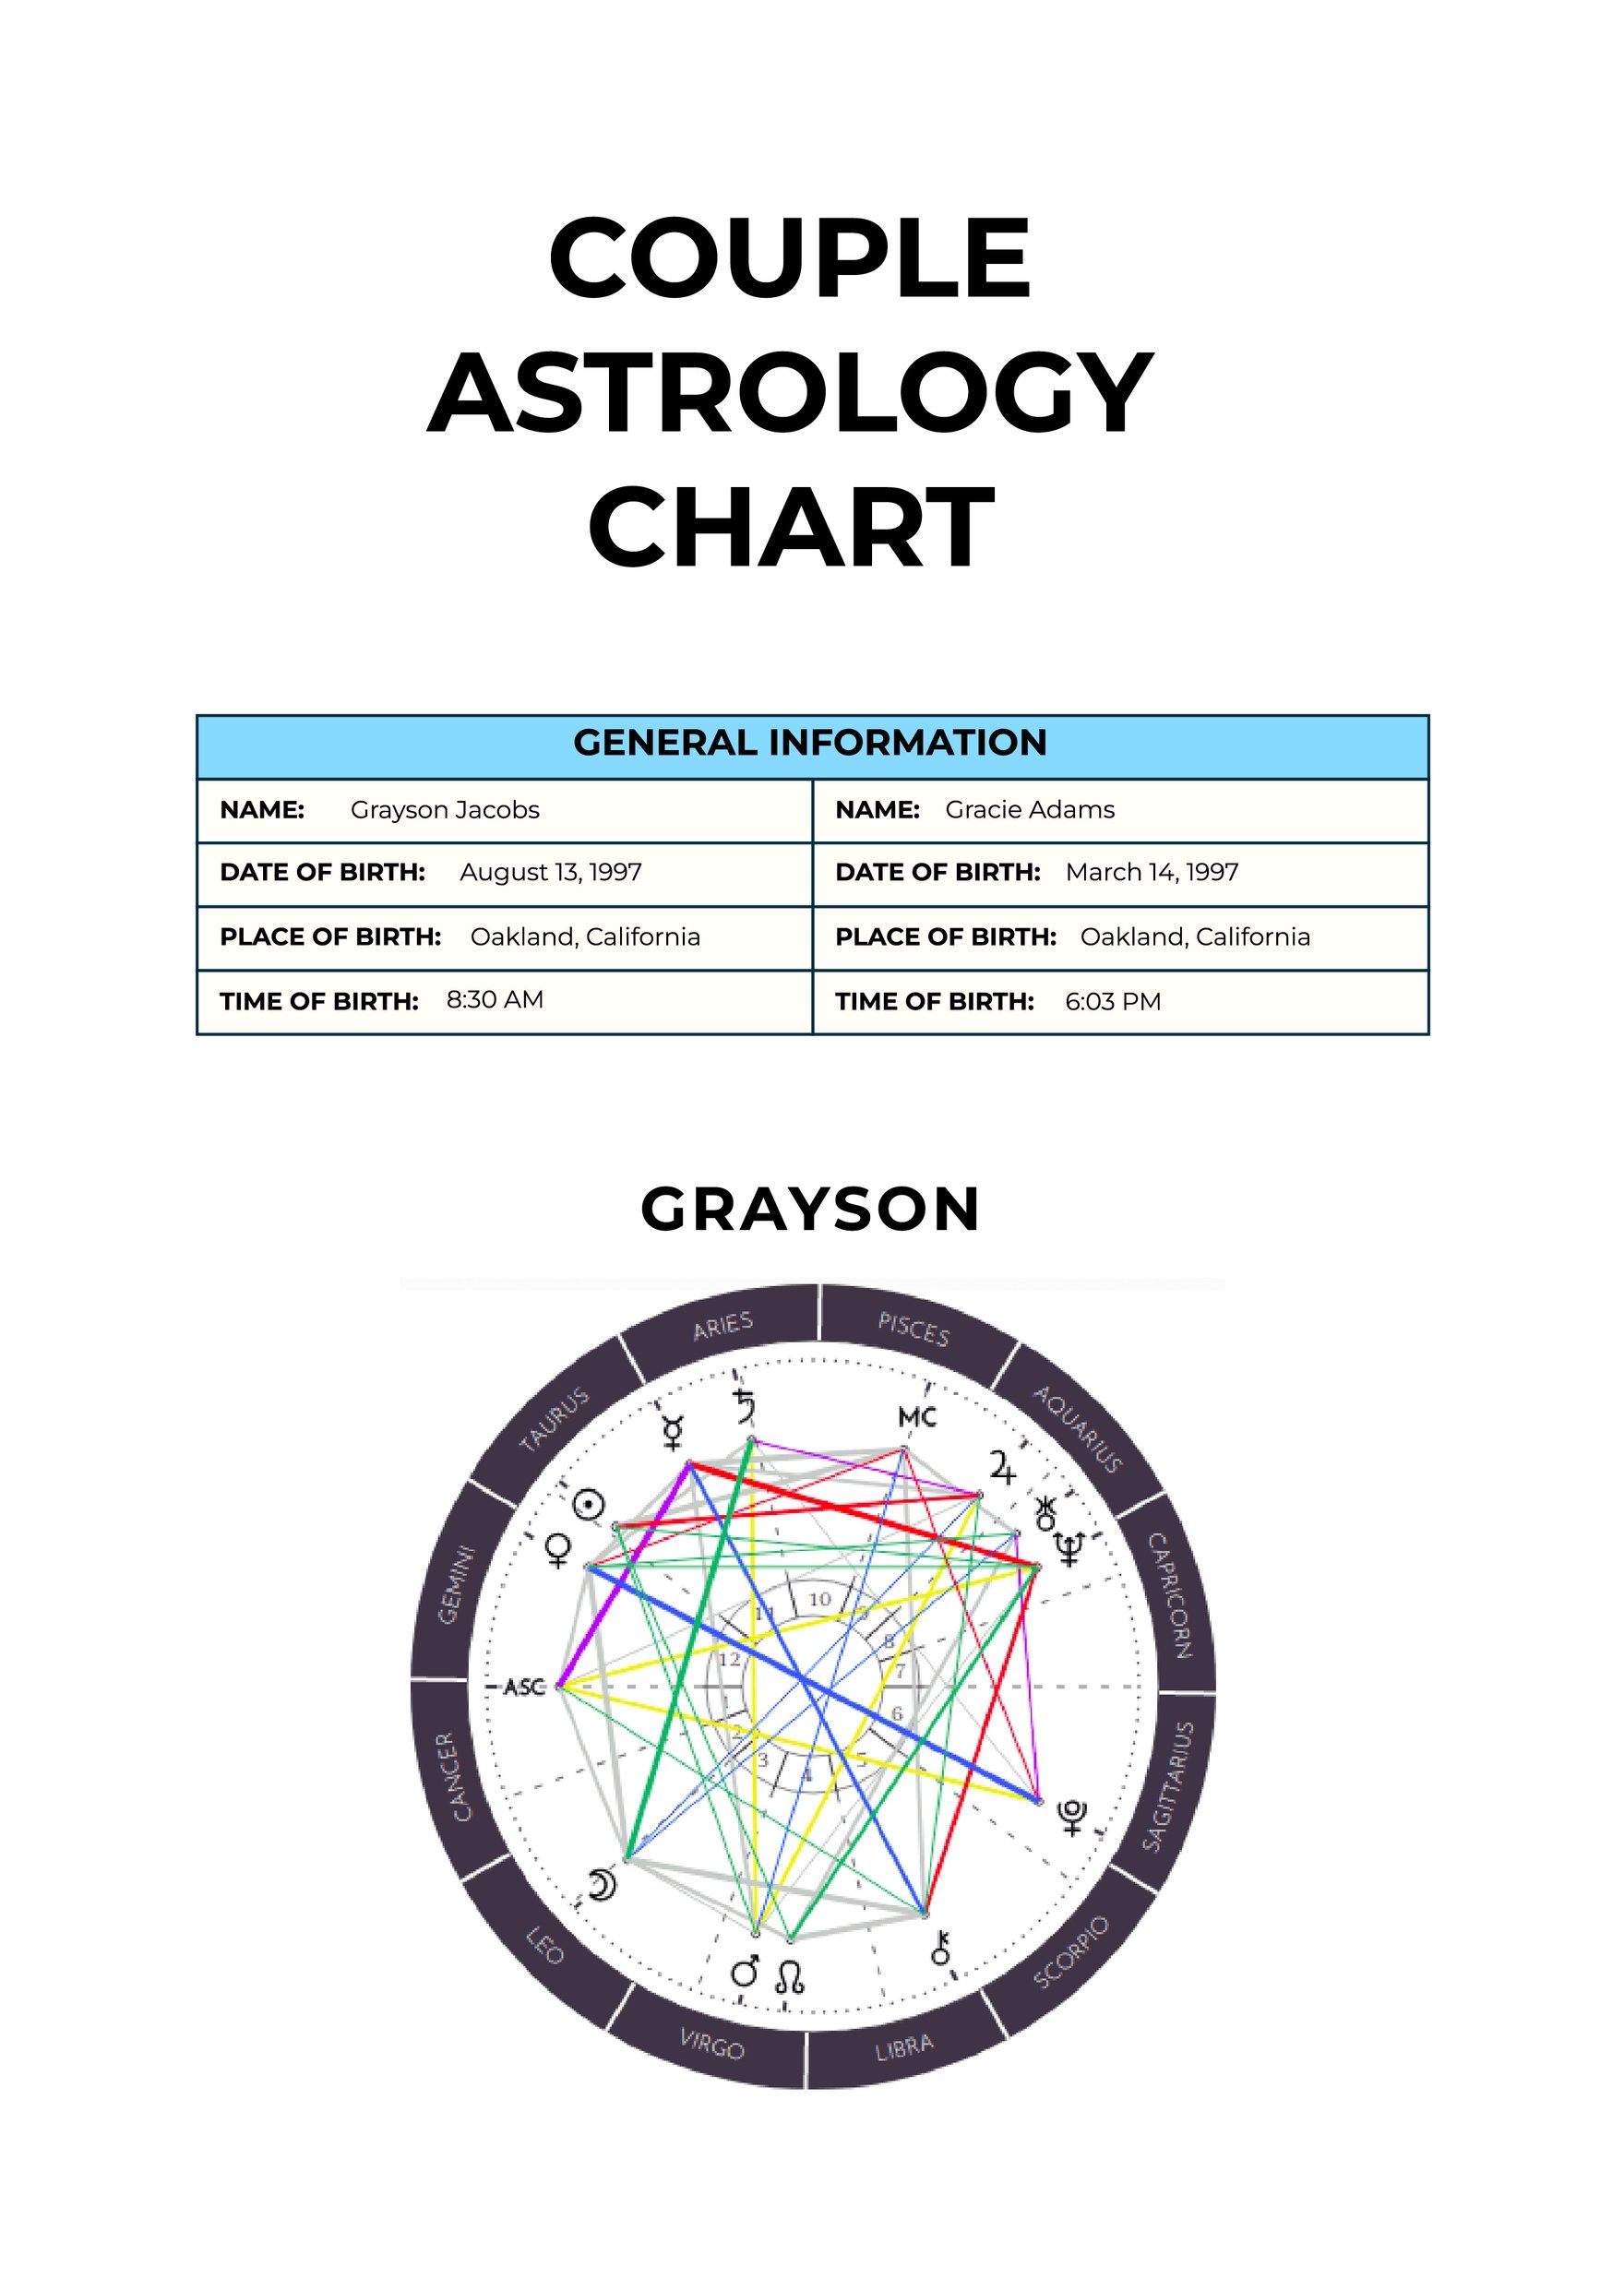 Couple Astrology Chart Template In Illustrator Pdf Download